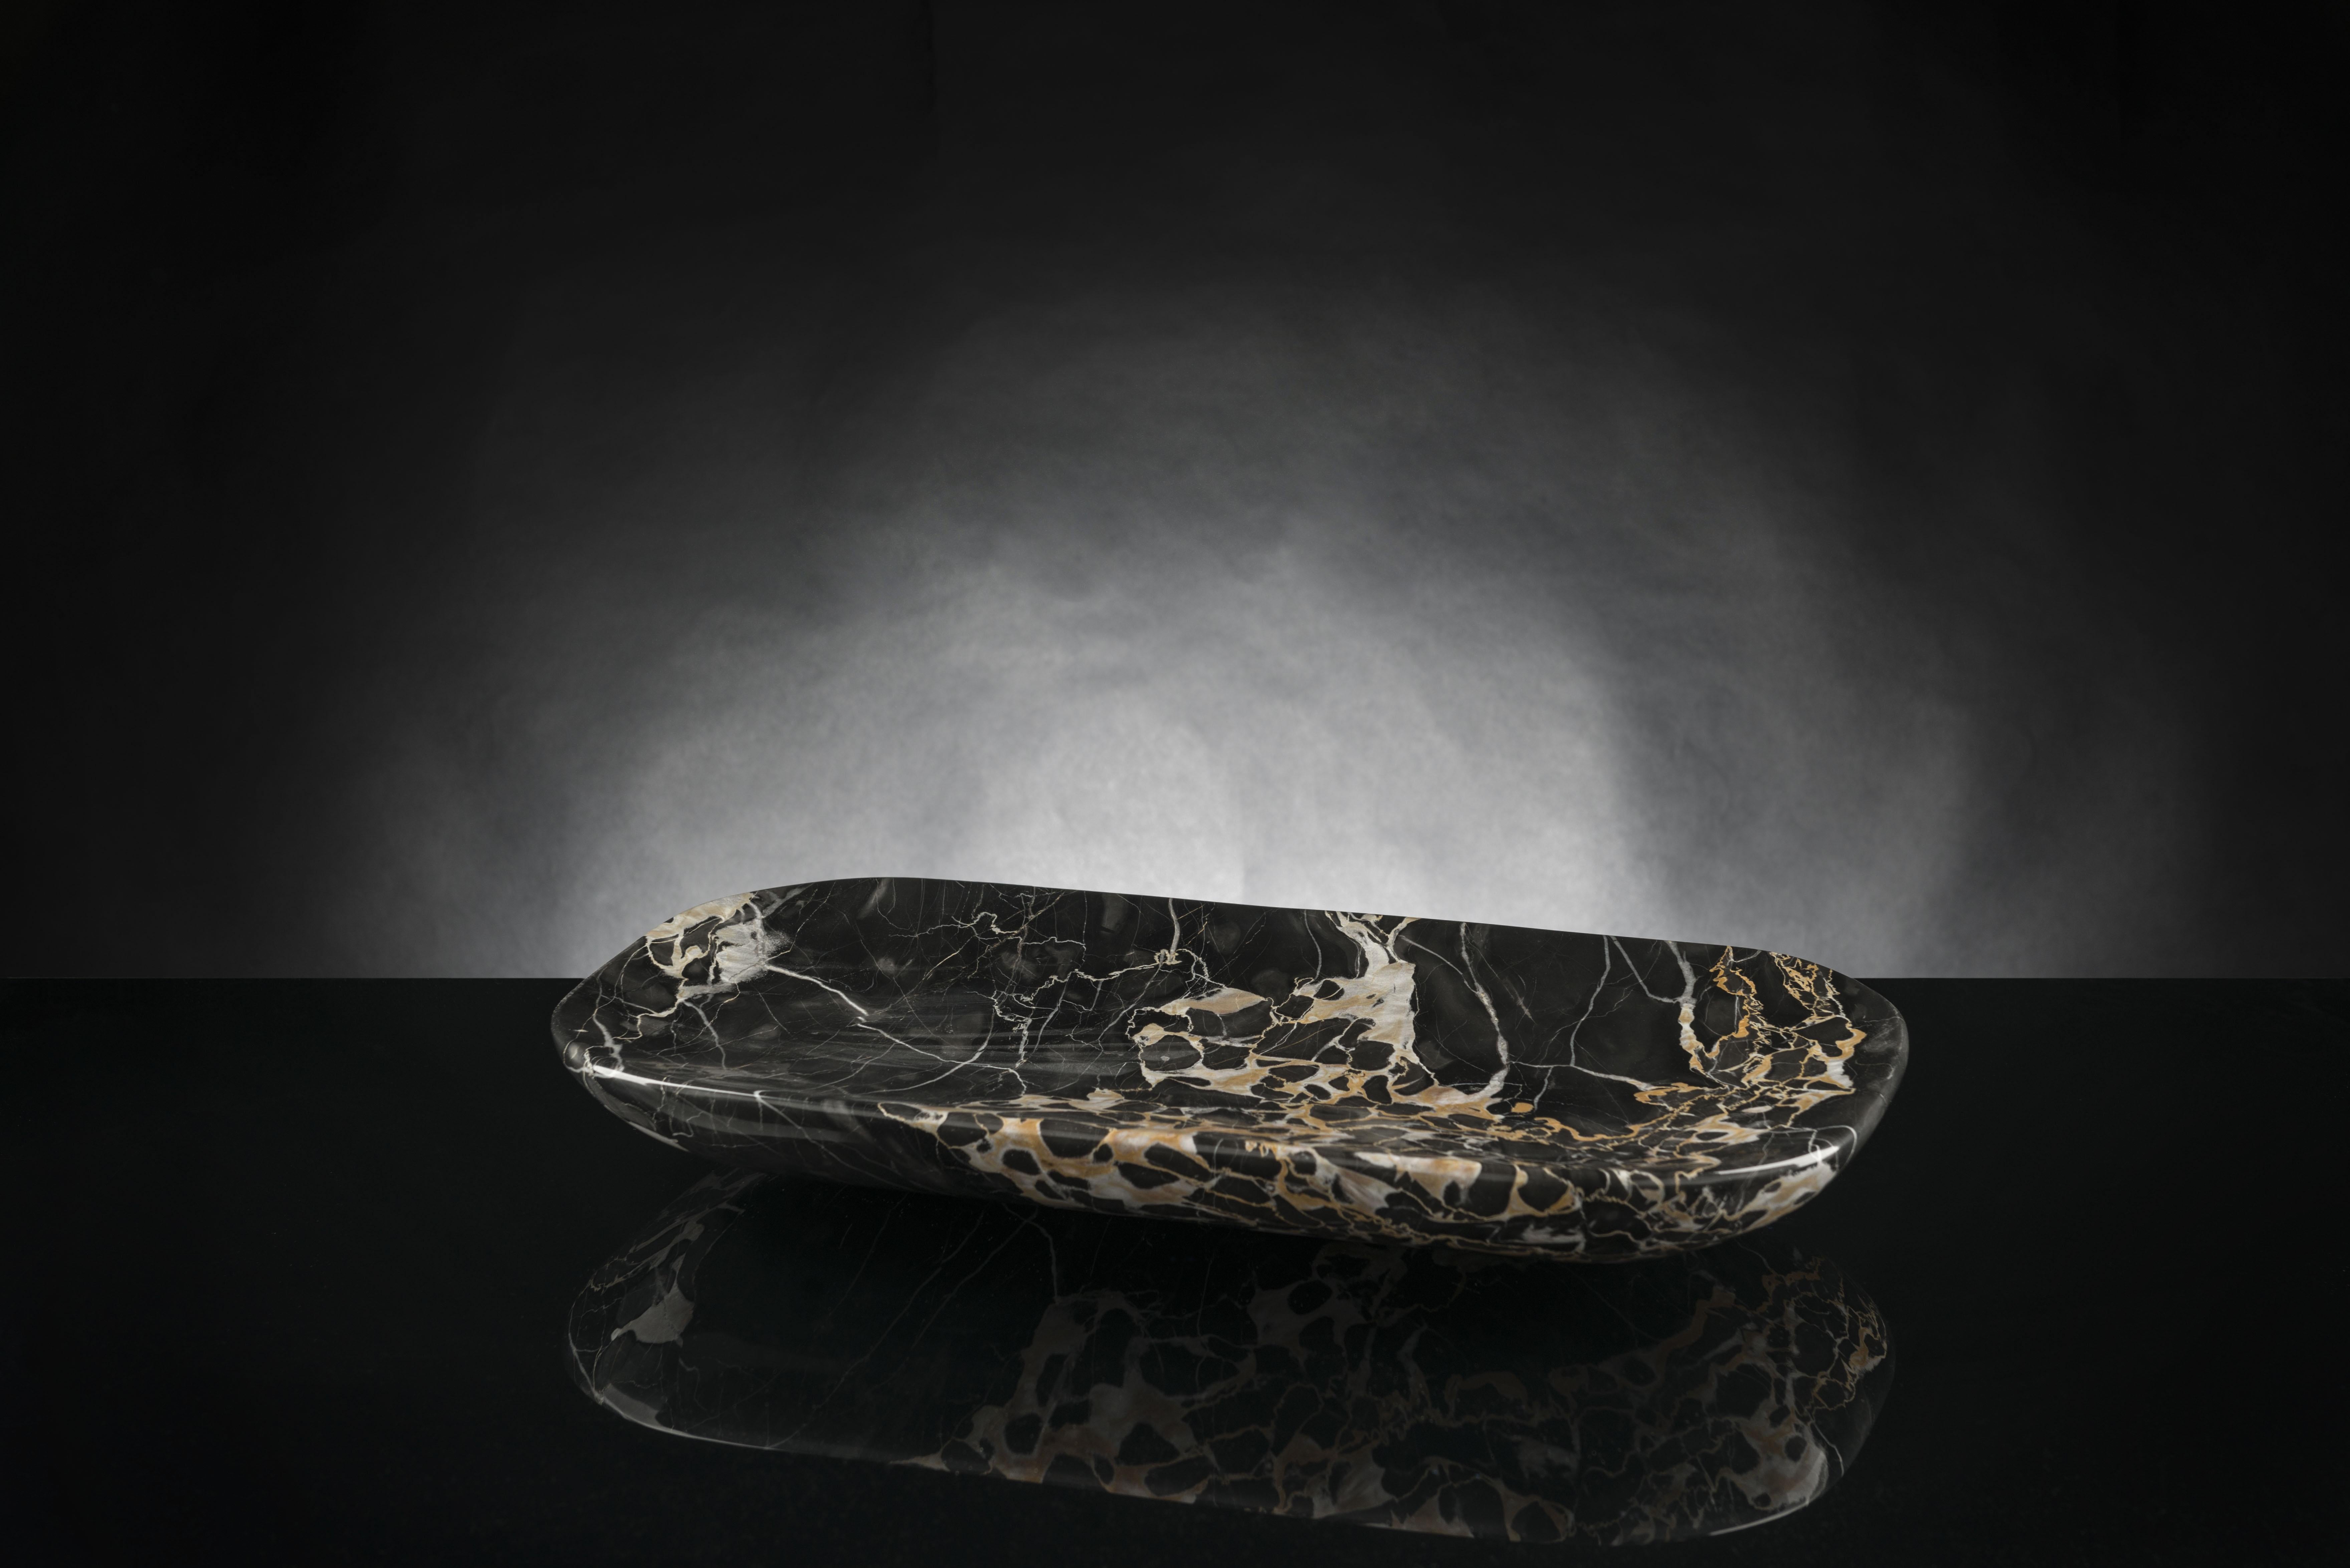 Modern marble tray in Portoro or Portovenere marble, a precious variety of black marble from Liguria (Northern Italy), made through the processing of natural stones with 5-axis pantographs, which make it possible to achieve more complex shapes than